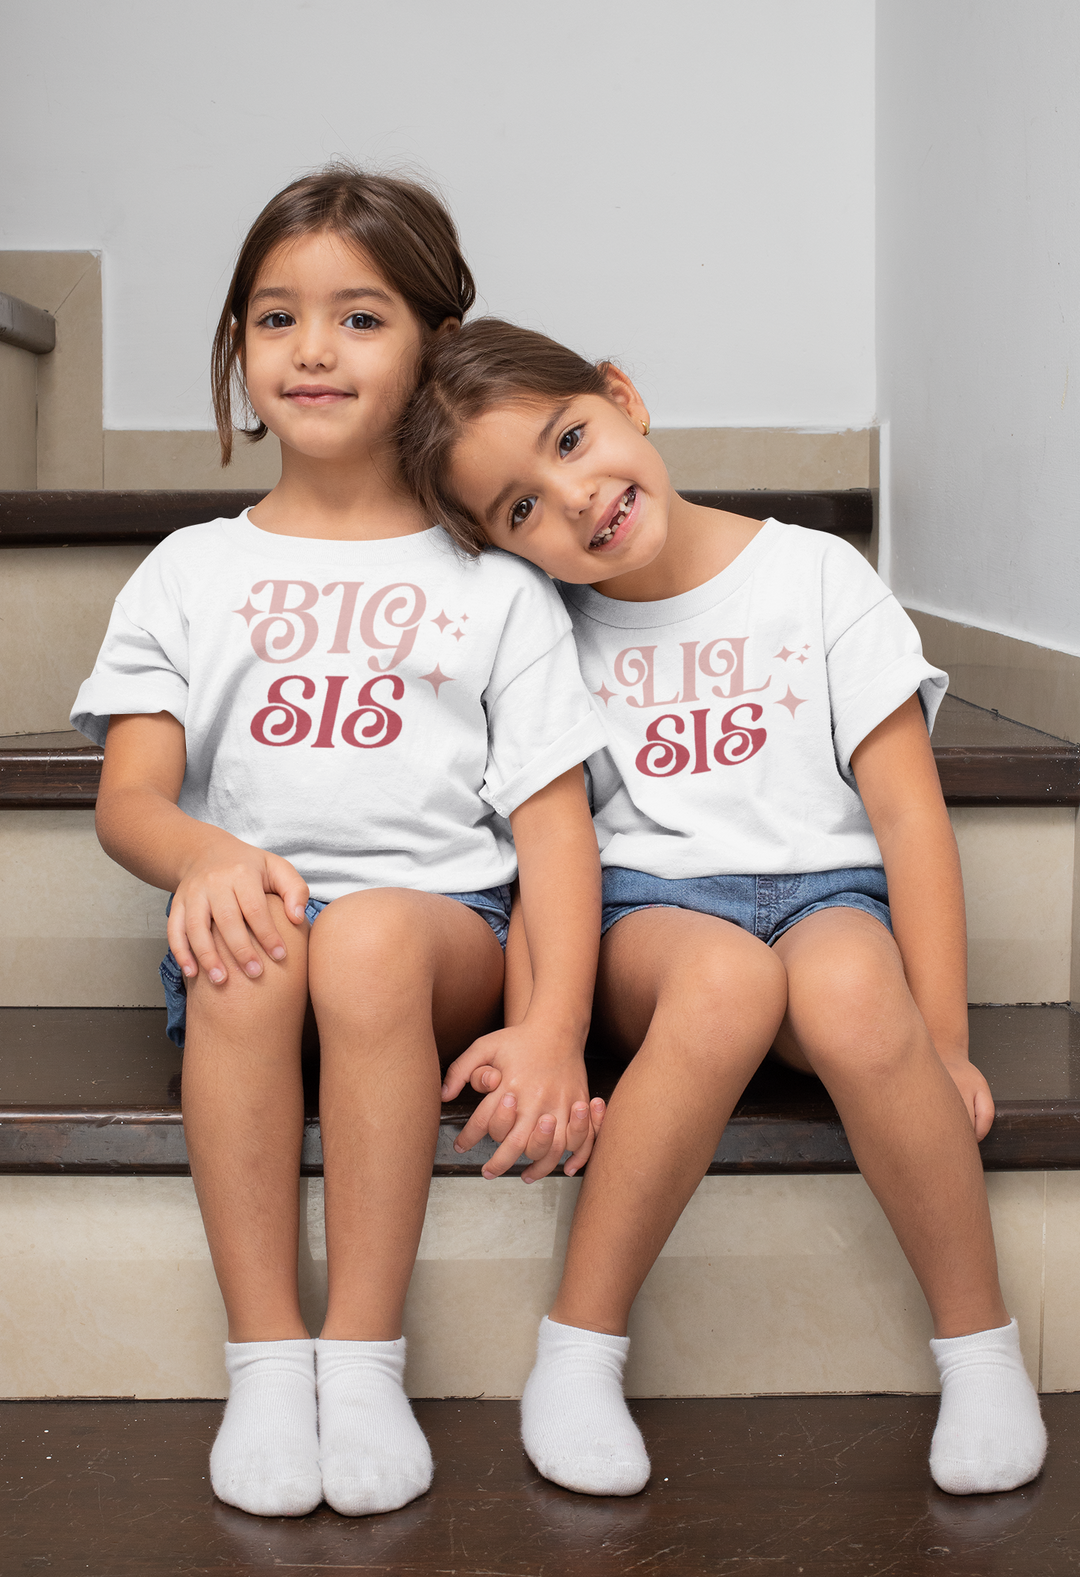 LIL SIS. T-shirt for toddlers and kids. - TeesForToddlersandKids -  t-shirt - sibling - lil-sis-t-shirt-for-toddler-sand-kids